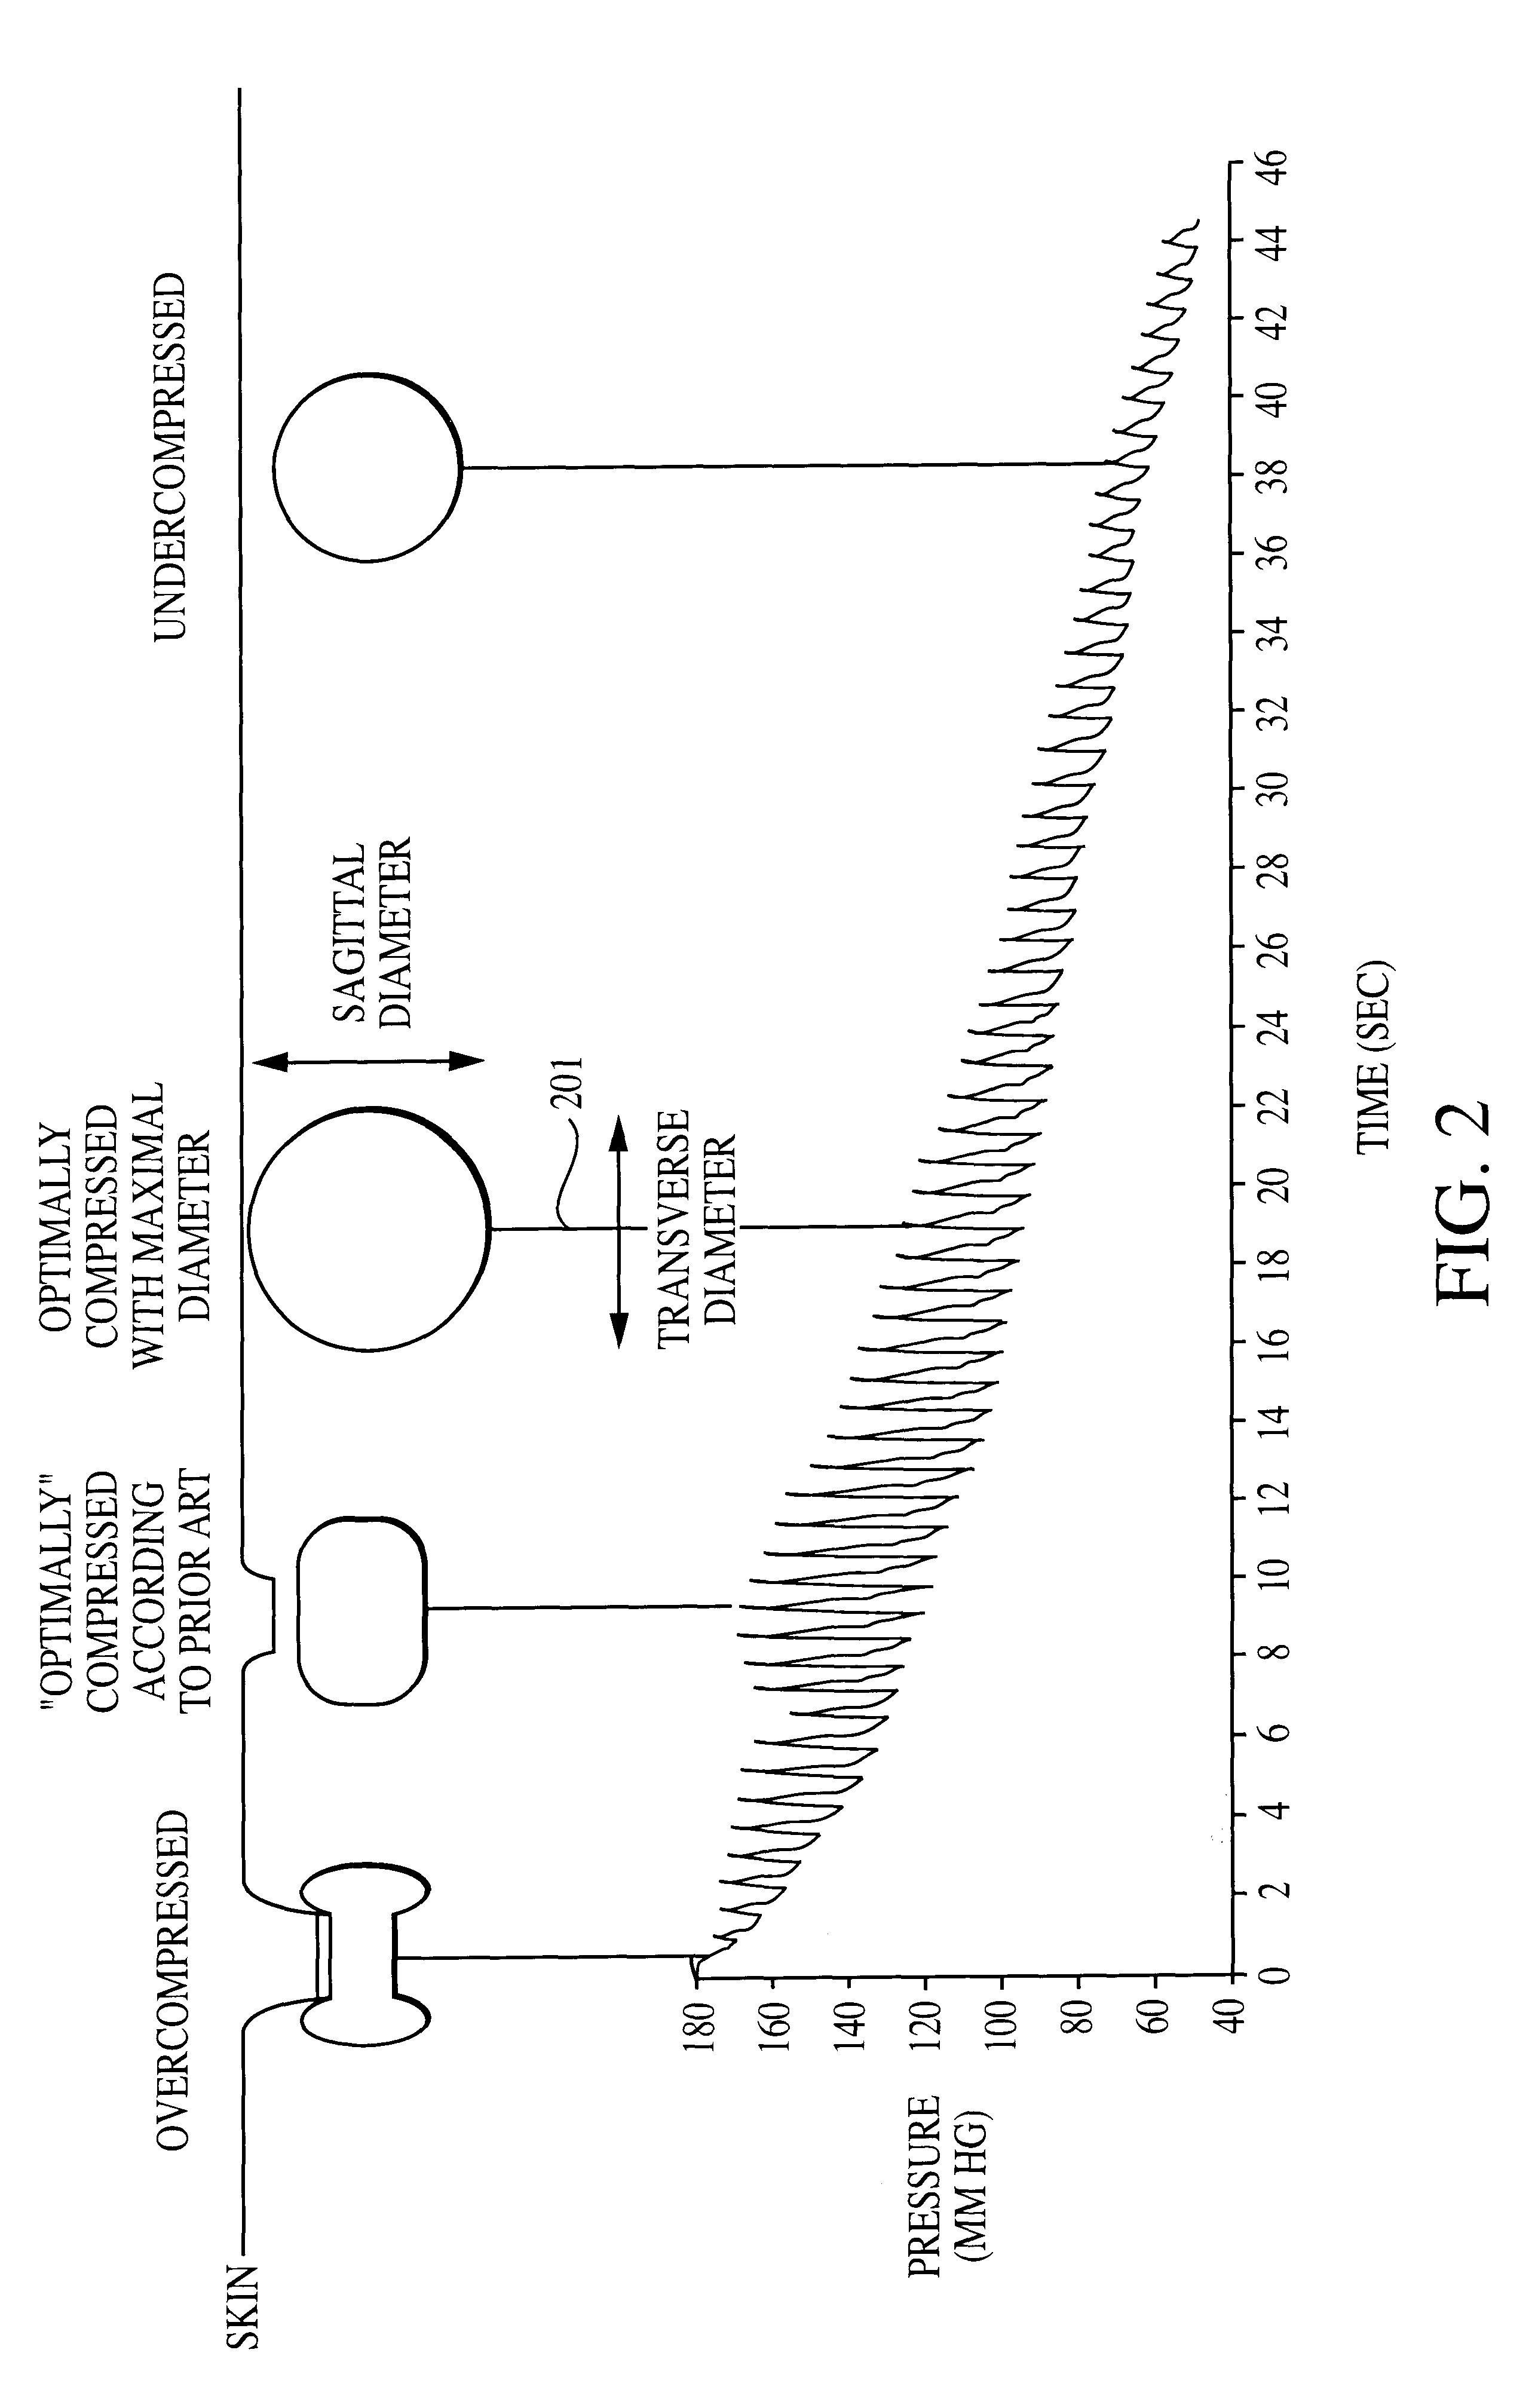 Method and apparatus for the noninvasive determination of arterial blood pressure